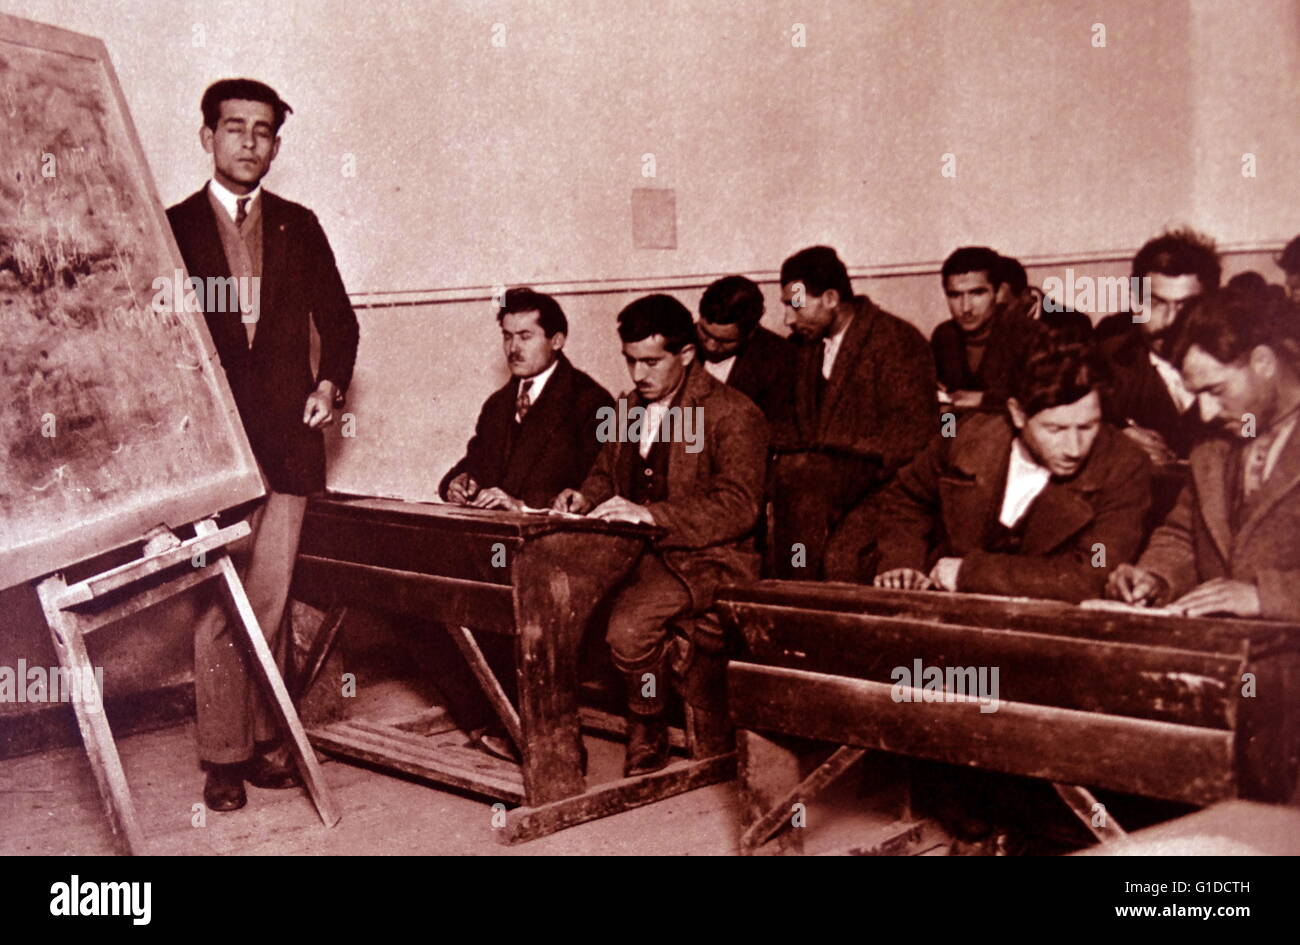 Photographic print of students being taught literacy in Turkey, under the Liberal Programmes introduced by Mustafa Kemal Atatürk (1881-1938). Dated 20th Century Stock Photo